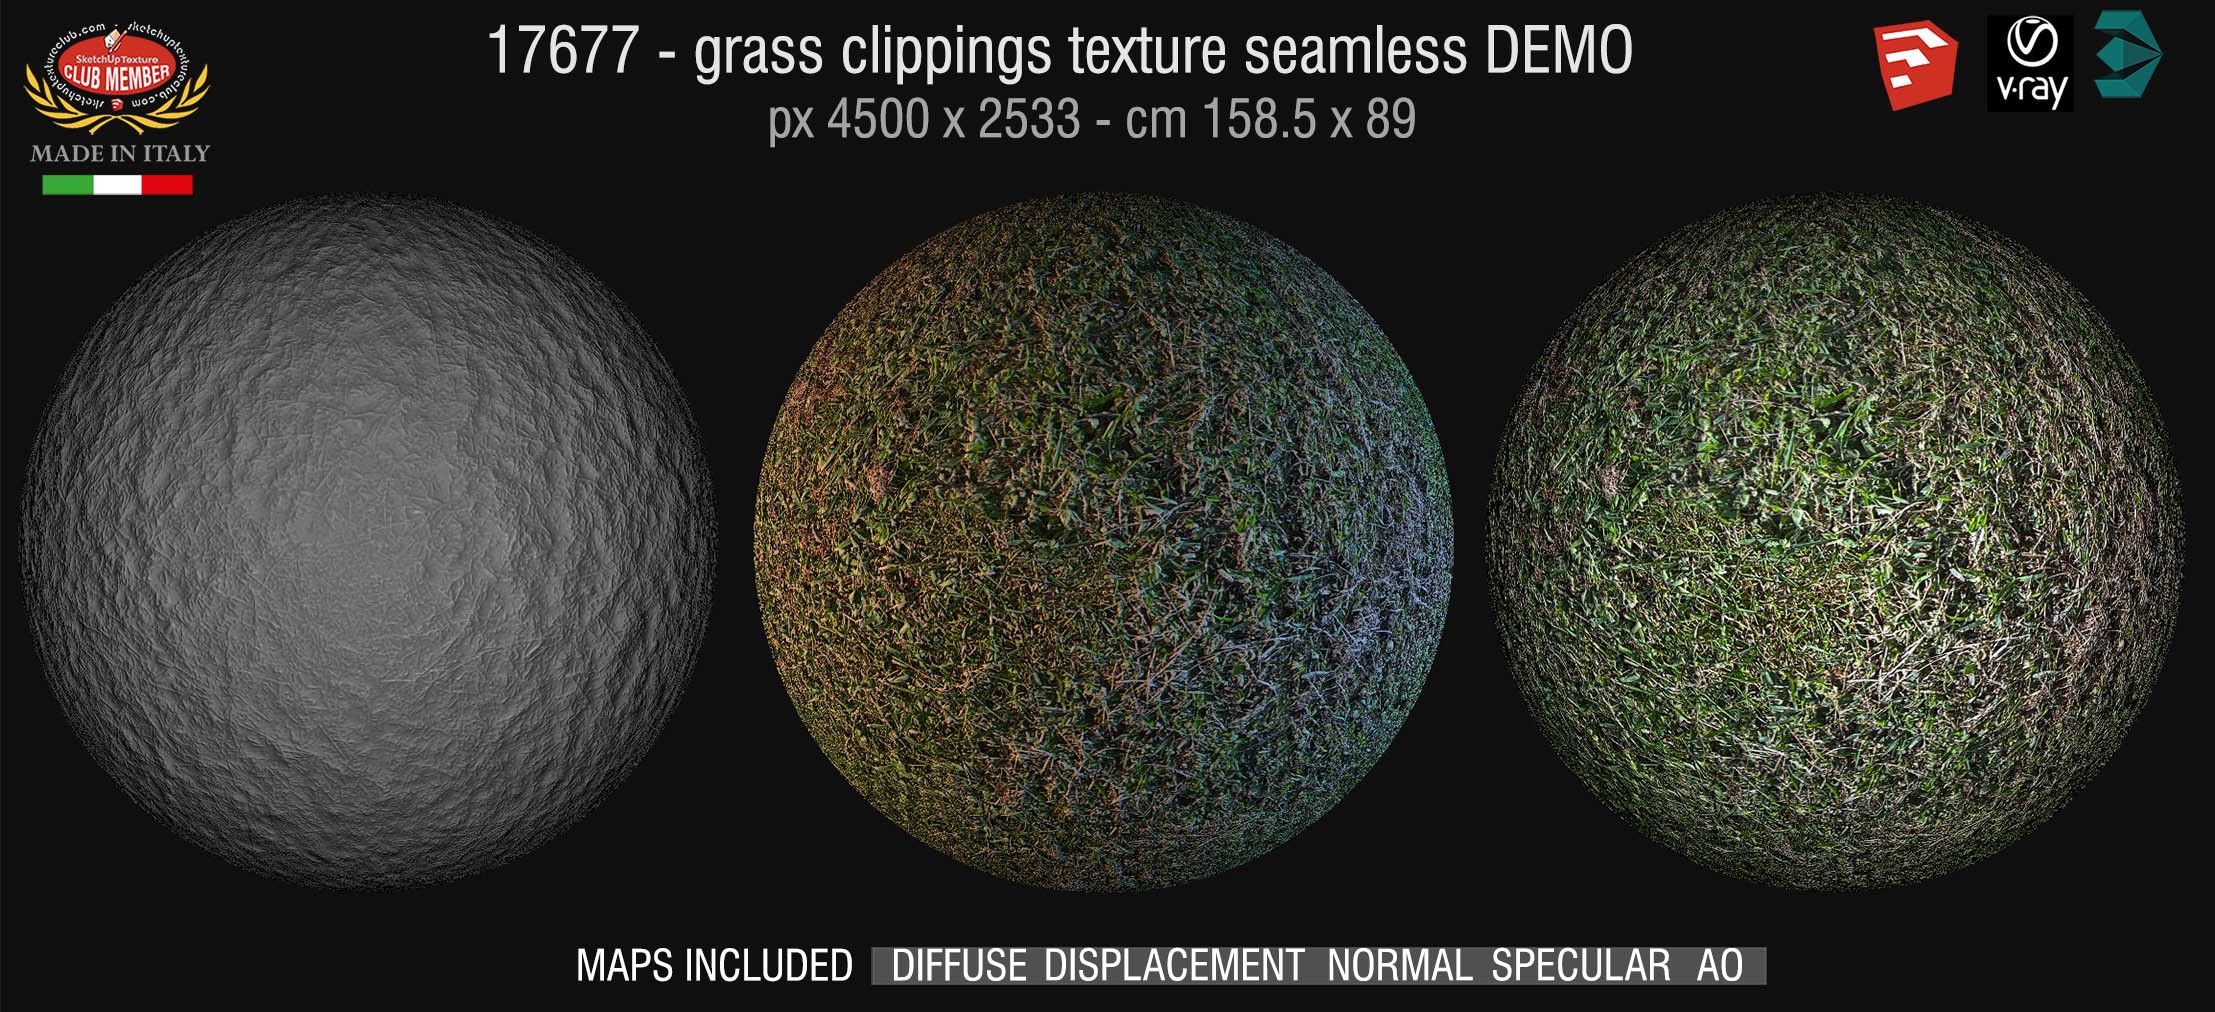 17677 HR Grass clippings texture + maps DEMO